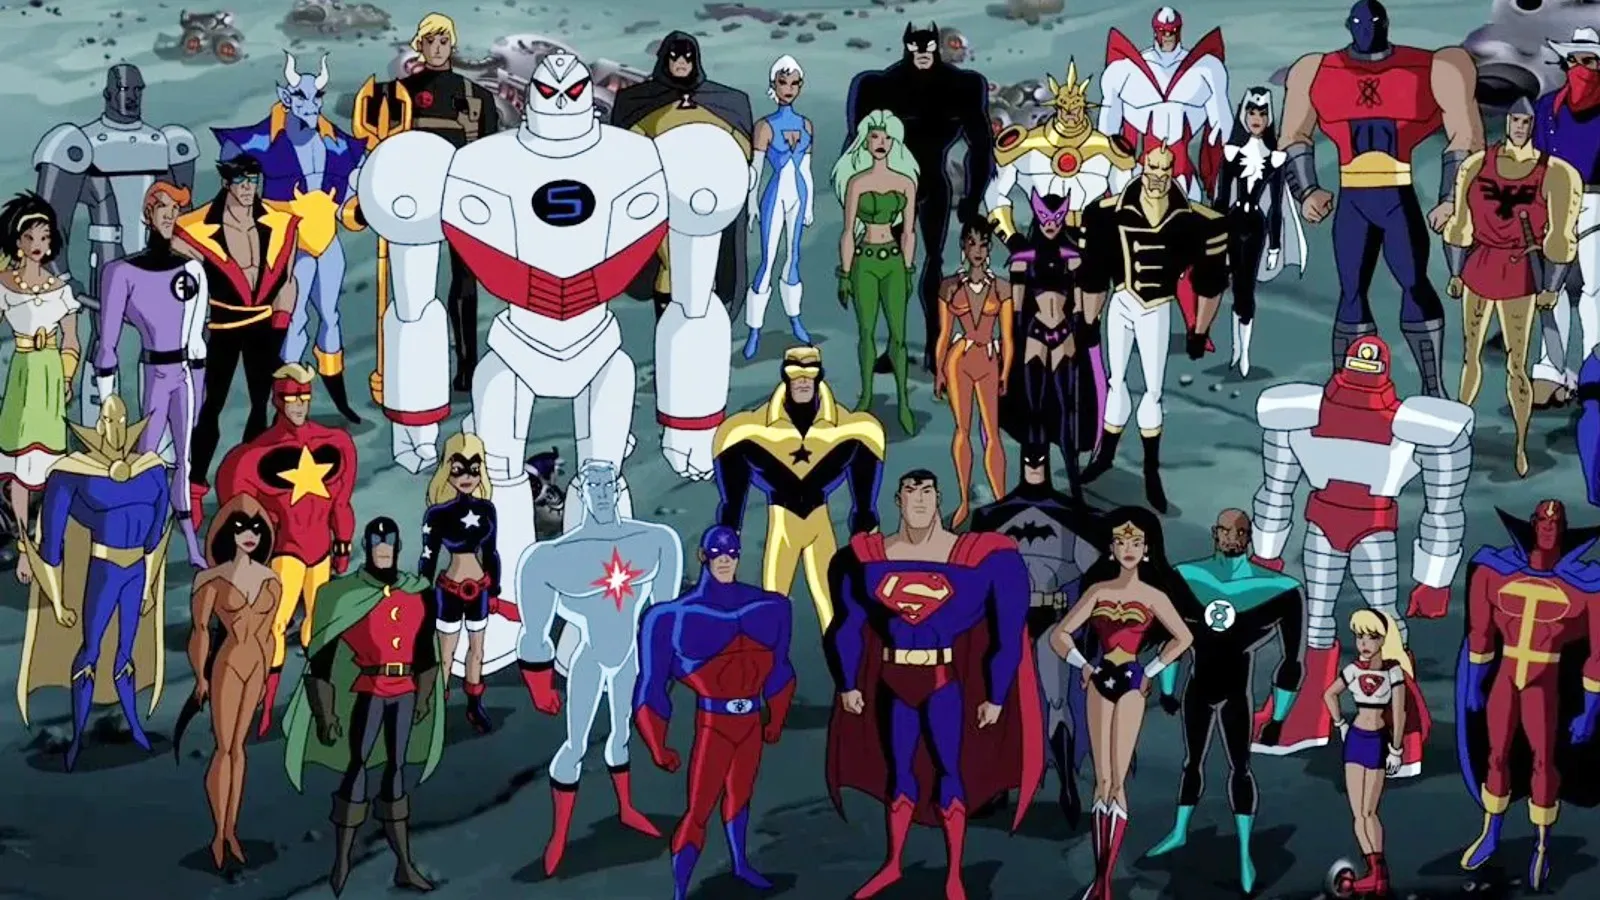 James Gunn shares which animated series will inspire the future DCU